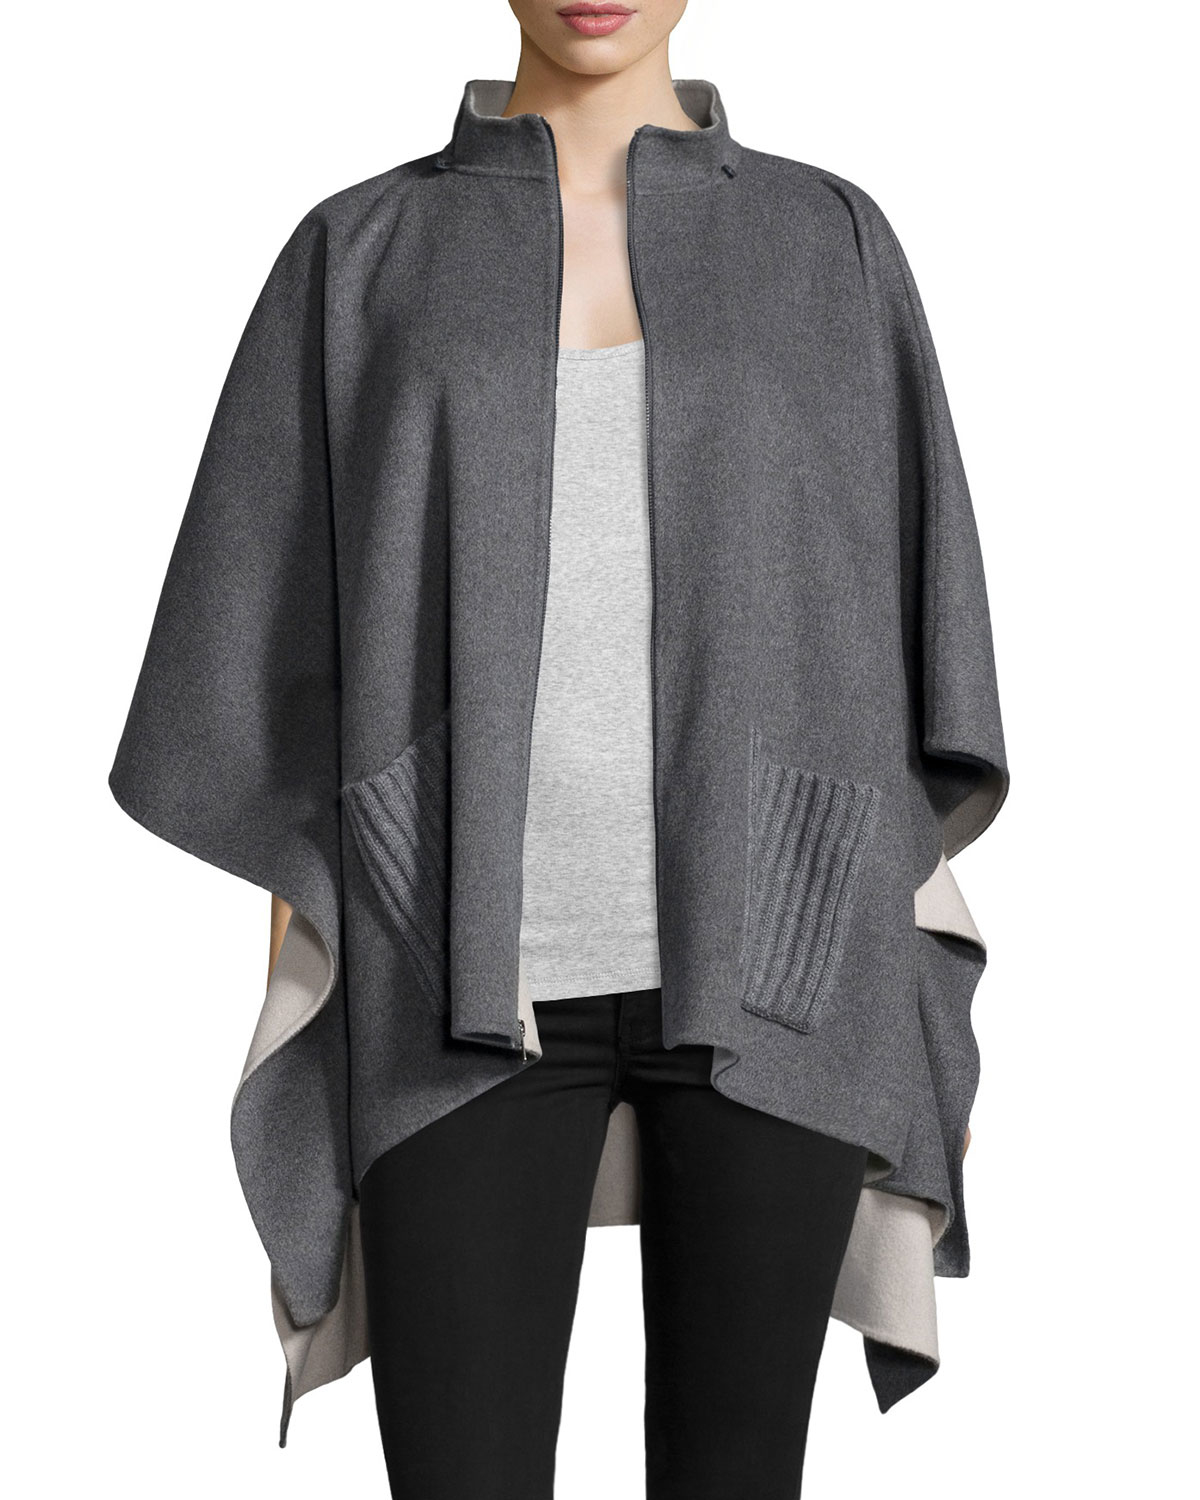 Lyst - Neiman Marcus Hooded Cashmere Zip Poncho in Gray